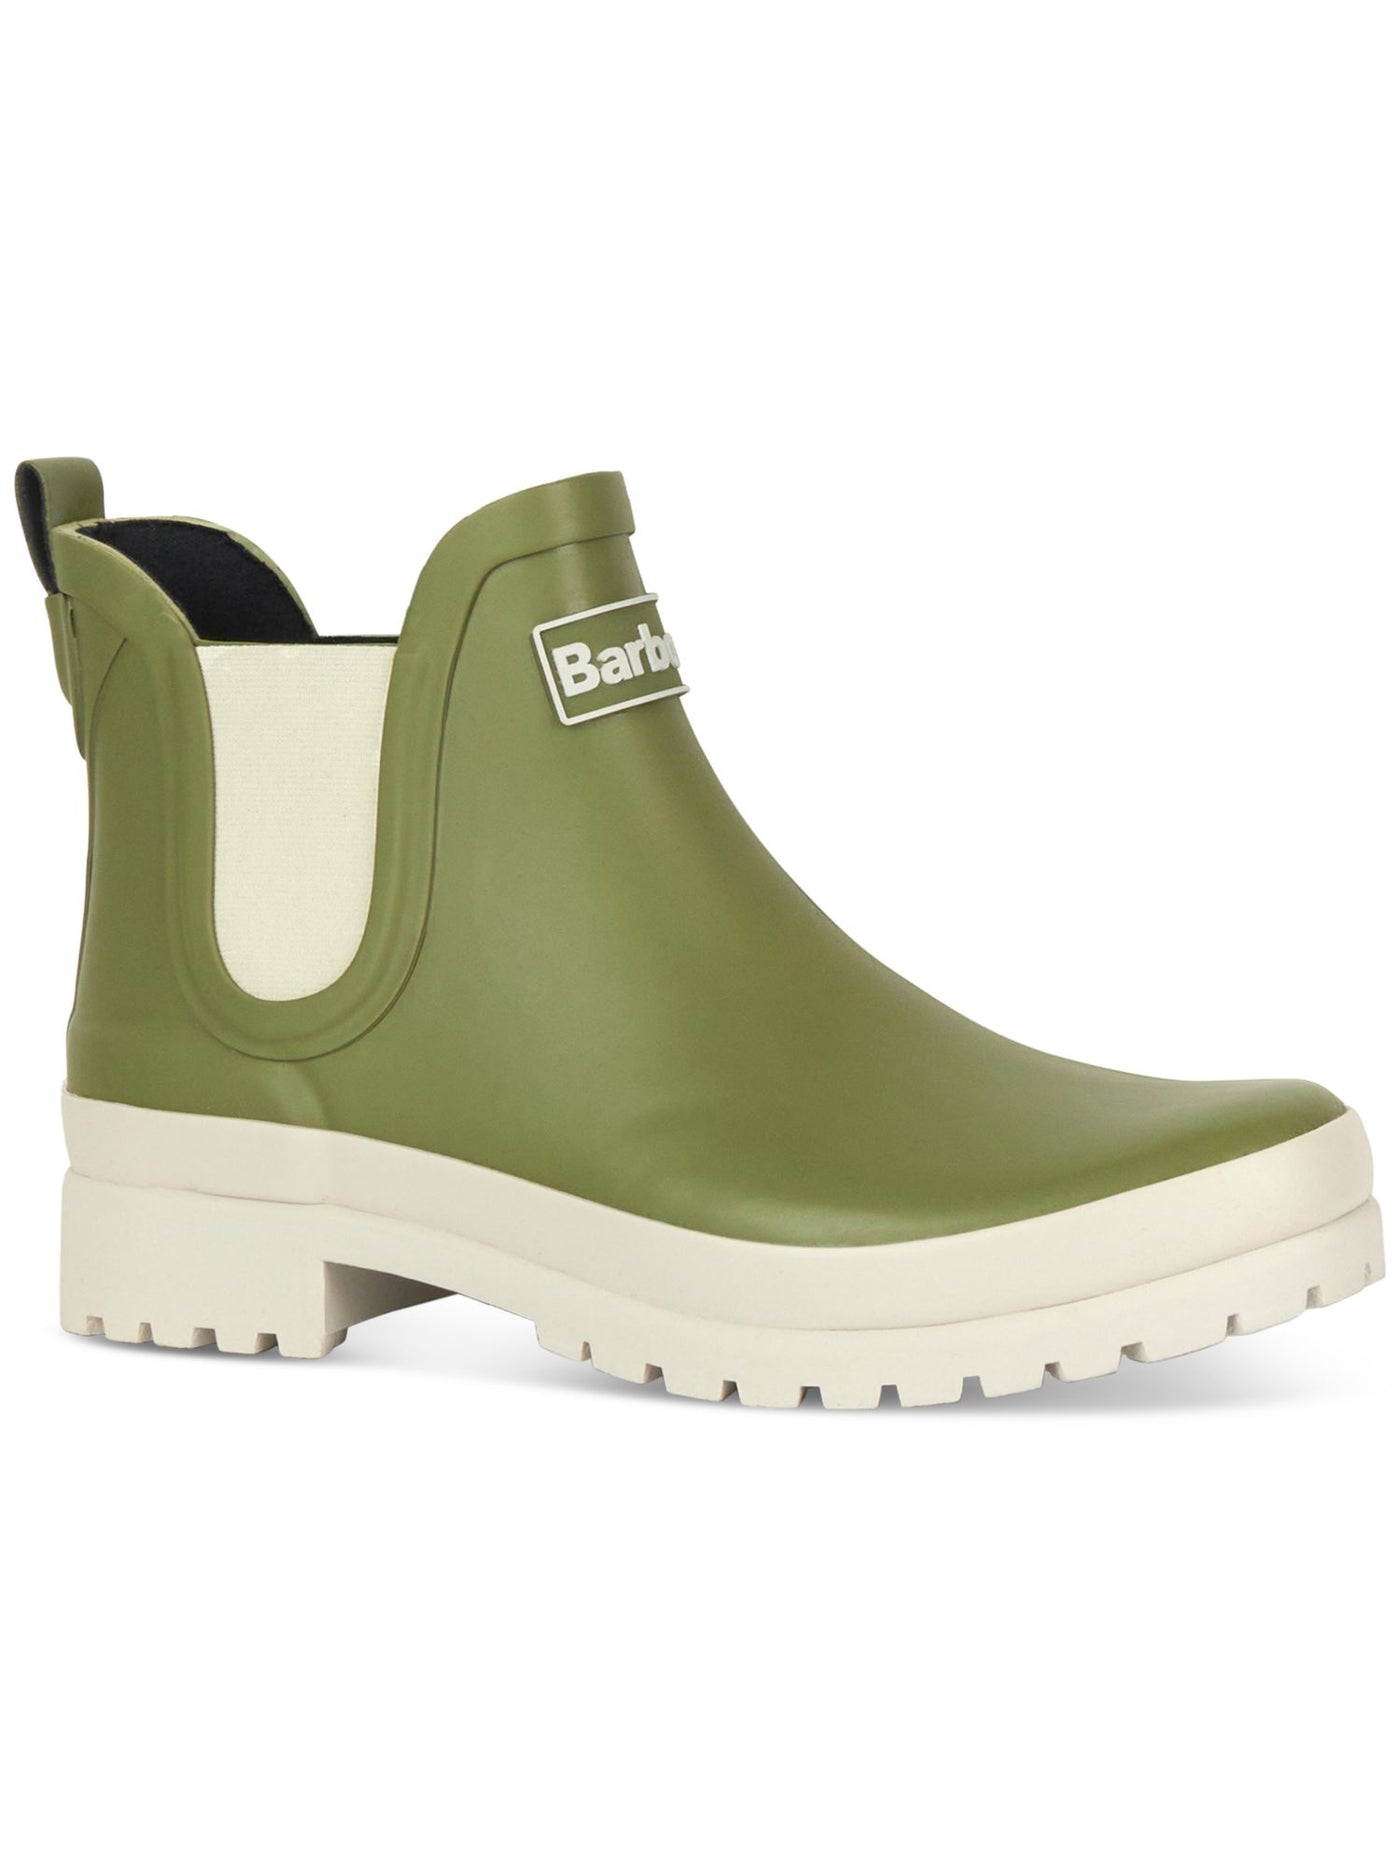 BARBOUR Womens Green Heel Pull-Tab Goring Water Resistant Mallow Round Toe Rain Boots 6